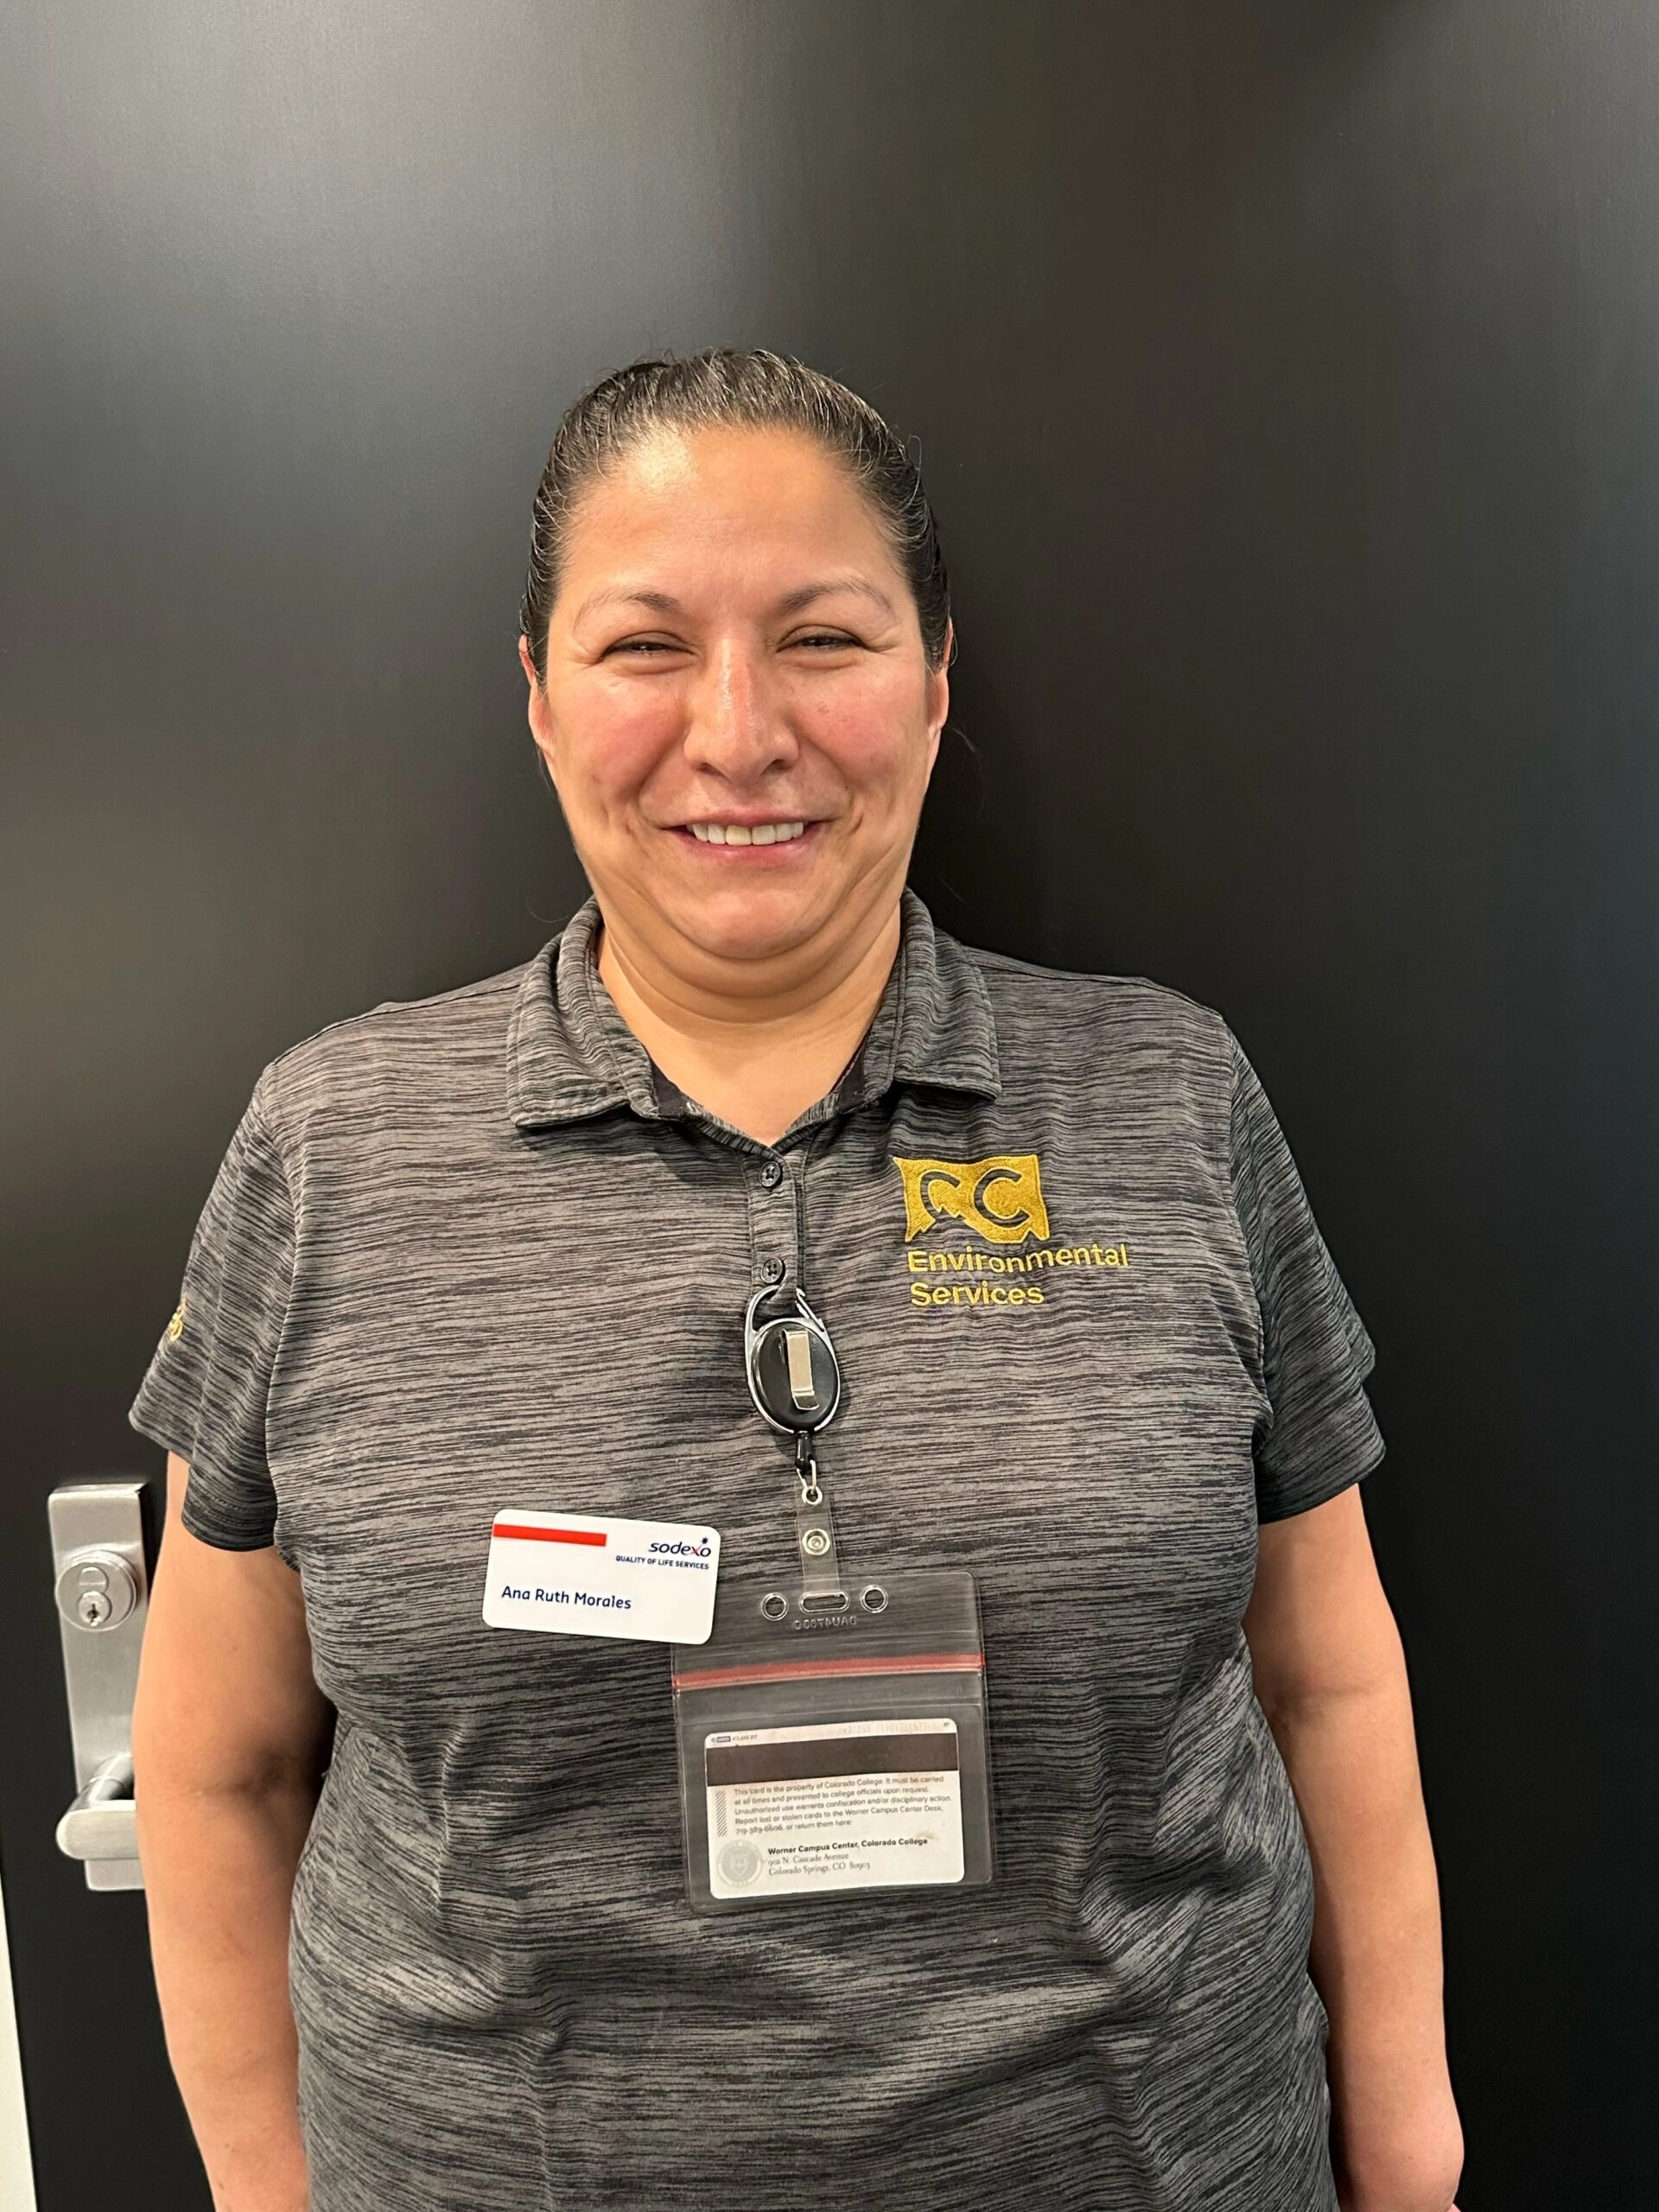 UMF|PerfectCLEAN Announces Ana Ruth Morales-Garcia as First Annual Education Hygiene Specialist Excellence Award Recipient